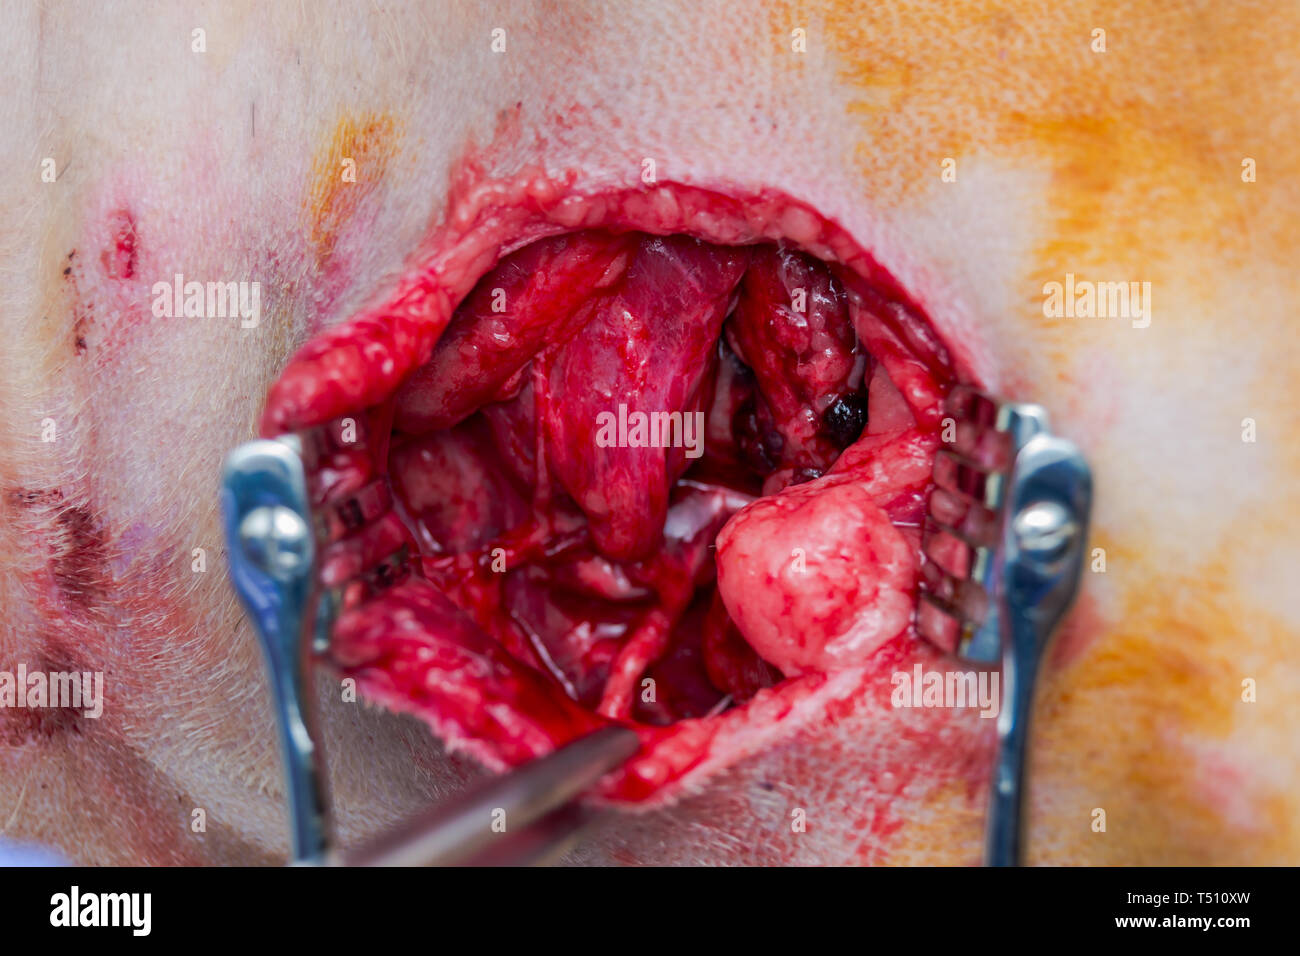 the skin, muscles, blood vessels and nerves destroyed by the  dog bite wound Stock Photo